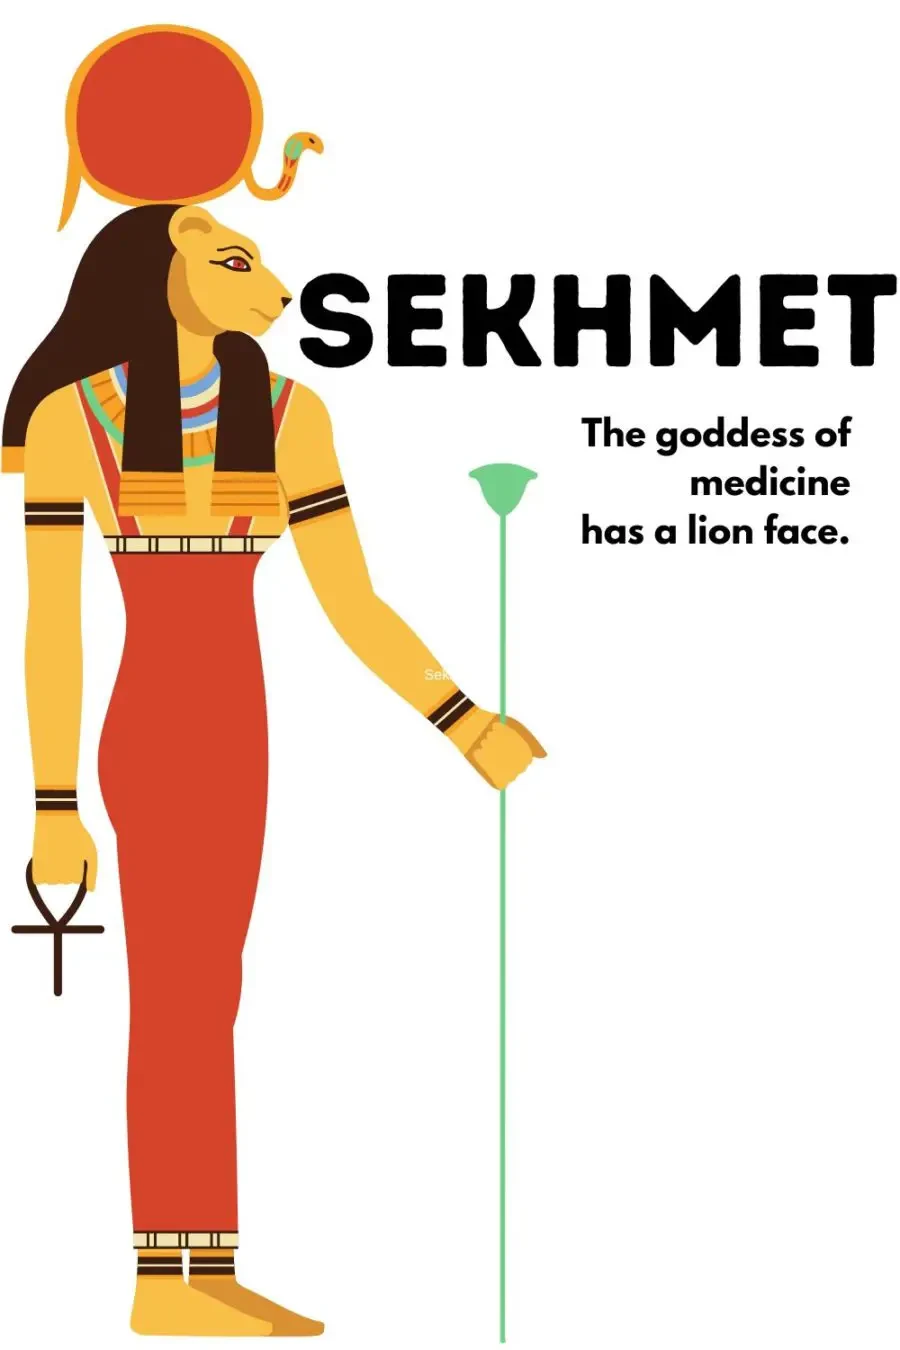 Sekhmet, the Egyptian goddess of healing and war with a lion's face